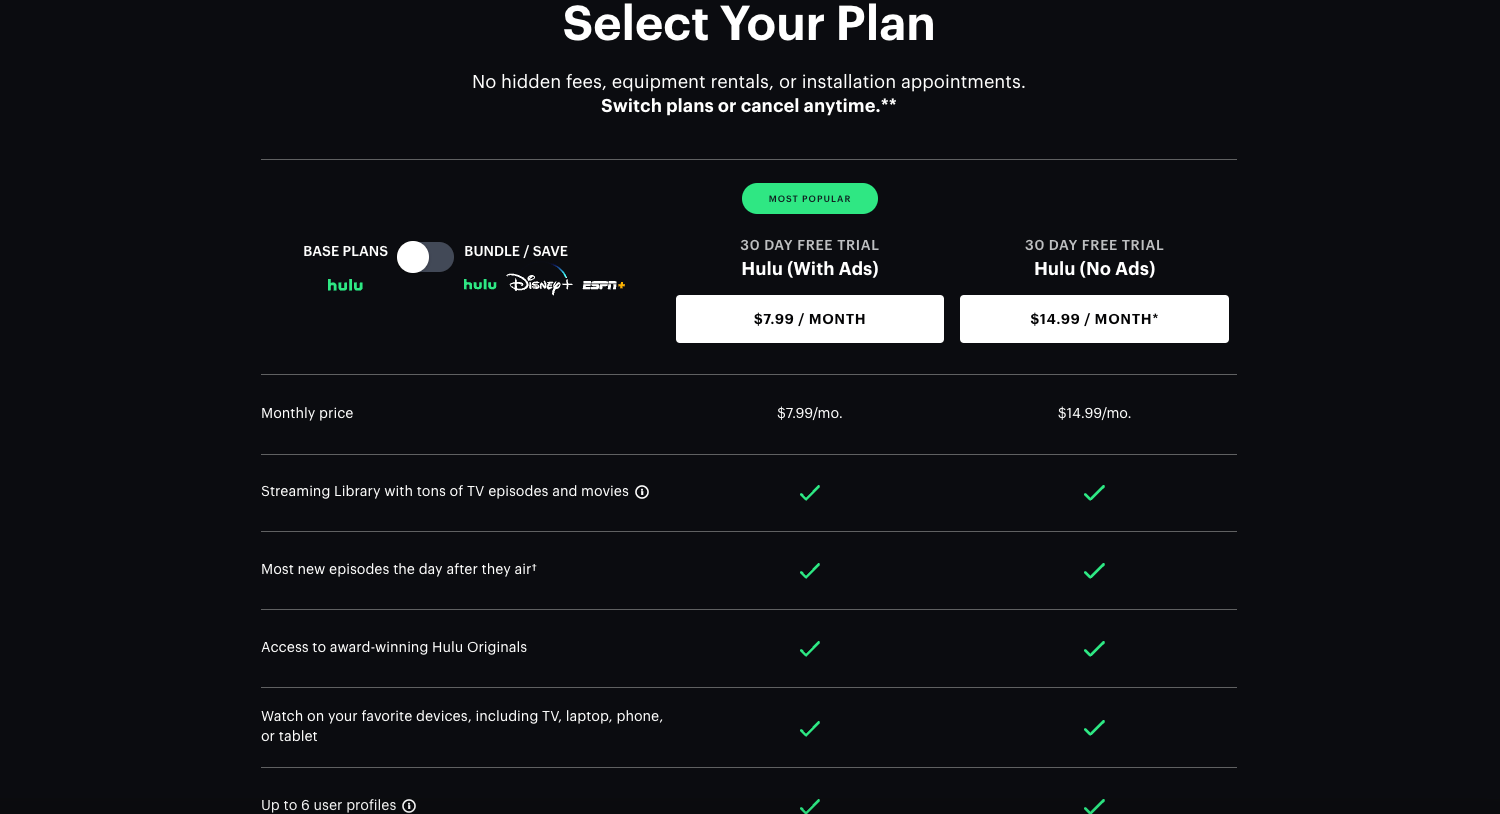 How Much Is Hulu? Cost, Plans, and Pricing